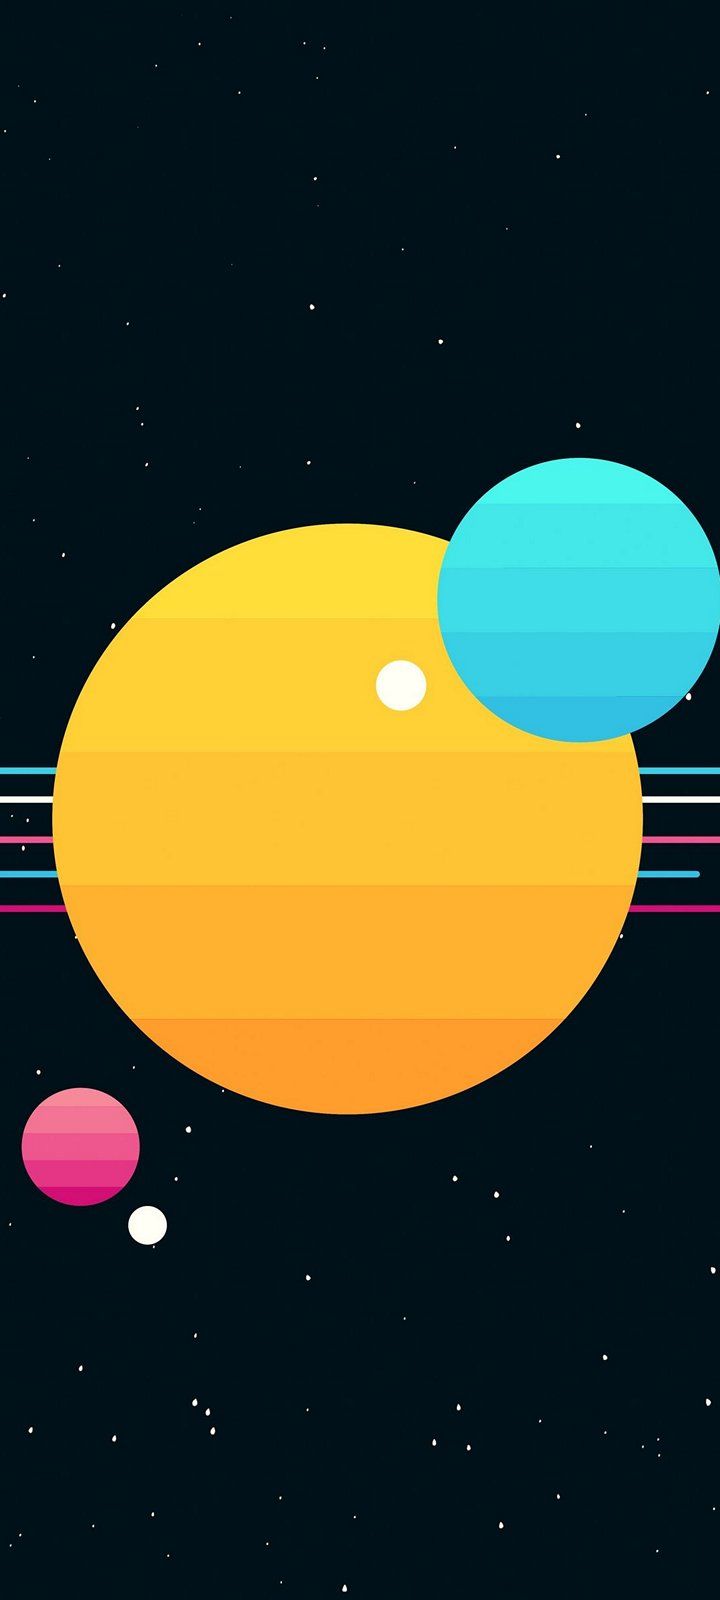 A colorful illustration of the planets in our solar system - Sun